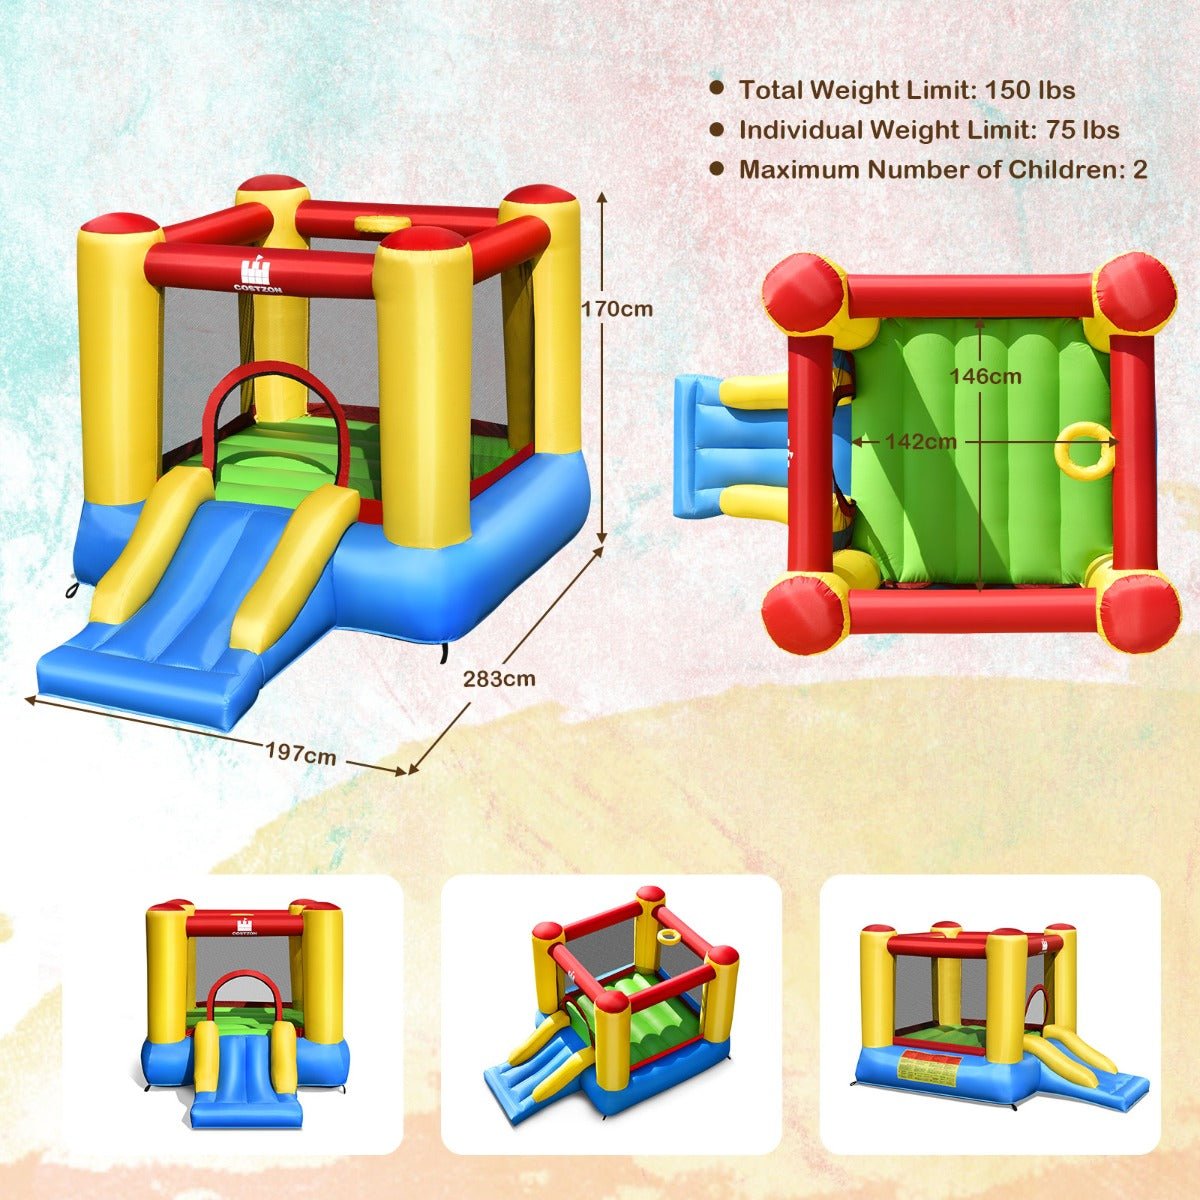 Children's Inflatable Bouncy Castle - Slide, Hoop, and Active Play